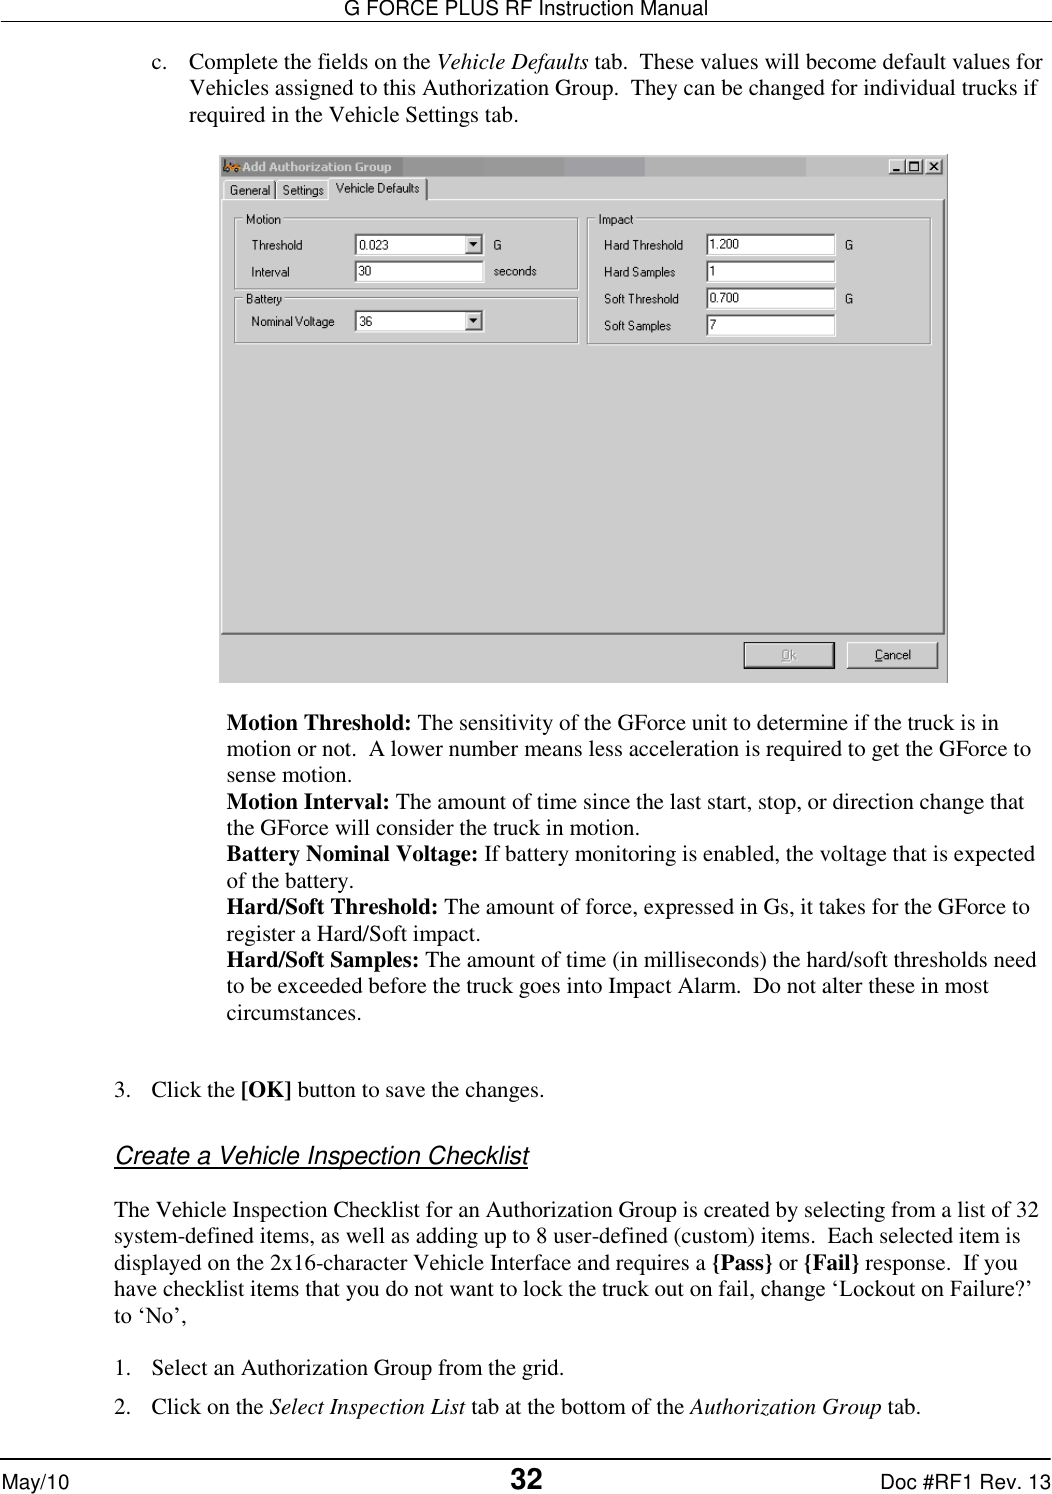 G FORCE PLUS RF Instruction Manual   May/10 32 Doc #RF1 Rev. 13 c. Complete the fields on the Vehicle Defaults tab.  These values will become default values for Vehicles assigned to this Authorization Group.  They can be changed for individual trucks if required in the Vehicle Settings tab.    Motion Threshold: The sensitivity of the GForce unit to determine if the truck is in motion or not.  A lower number means less acceleration is required to get the GForce to sense motion. Motion Interval: The amount of time since the last start, stop, or direction change that the GForce will consider the truck in motion. Battery Nominal Voltage: If battery monitoring is enabled, the voltage that is expected of the battery. Hard/Soft Threshold: The amount of force, expressed in Gs, it takes for the GForce to register a Hard/Soft impact. Hard/Soft Samples: The amount of time (in milliseconds) the hard/soft thresholds need to be exceeded before the truck goes into Impact Alarm.  Do not alter these in most circumstances.   3. Click the [OK] button to save the changes.  Create a Vehicle Inspection Checklist  The Vehicle Inspection Checklist for an Authorization Group is created by selecting from a list of 32 system-defined items, as well as adding up to 8 user-defined (custom) items.  Each selected item is displayed on the 2x16-character Vehicle Interface and requires a {Pass} or {Fail} response.  If you have checklist items that you do not want to lock the truck out on fail, change ‘Lockout on Failure?’ to ‘No’,  1. Select an Authorization Group from the grid. 2. Click on the Select Inspection List tab at the bottom of the Authorization Group tab. 